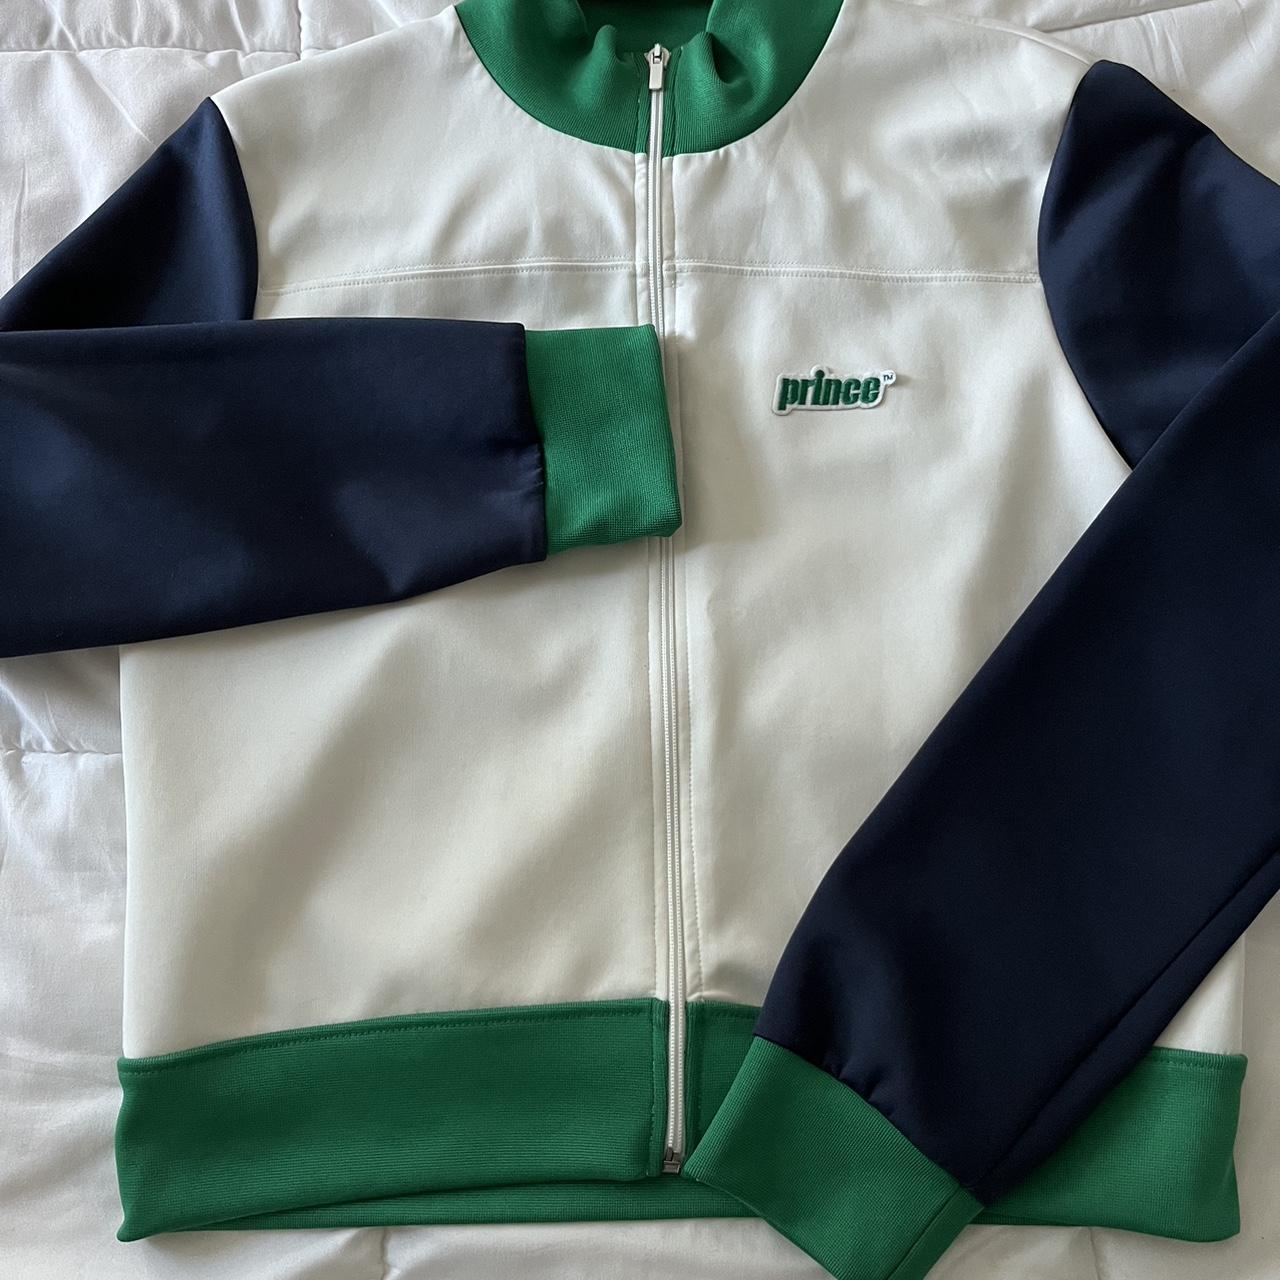 Prince Men's White and Green Jacket